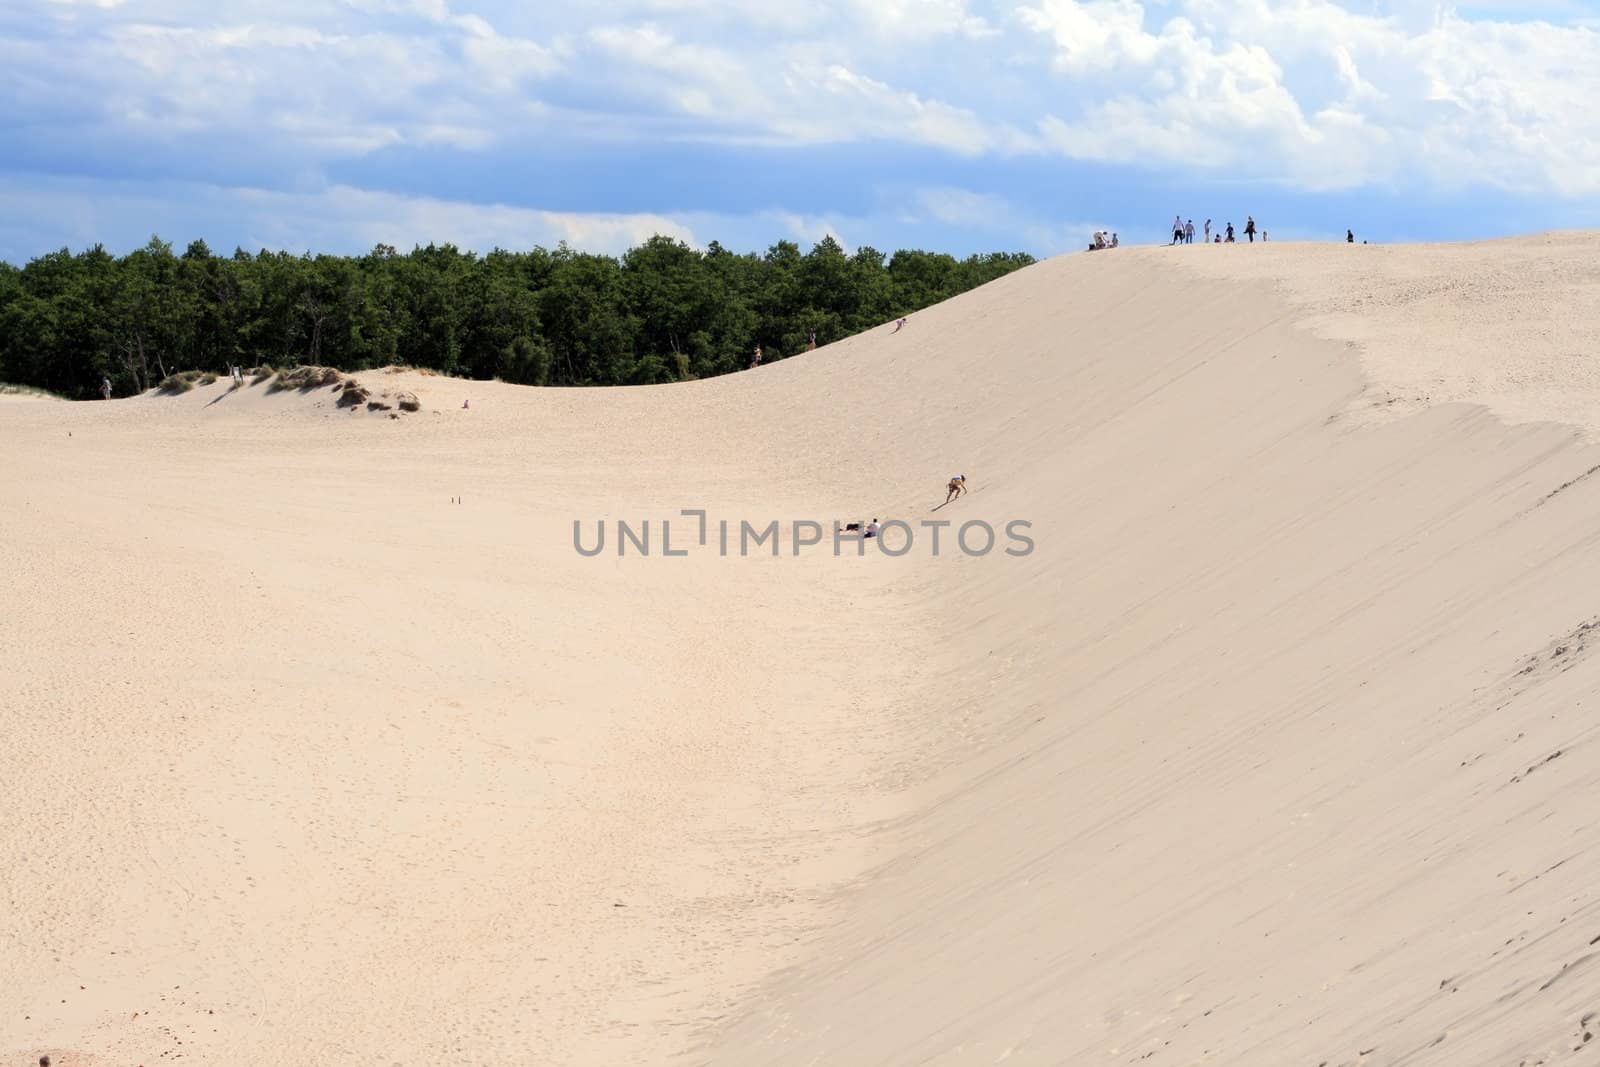 Sand dunes by remik44992